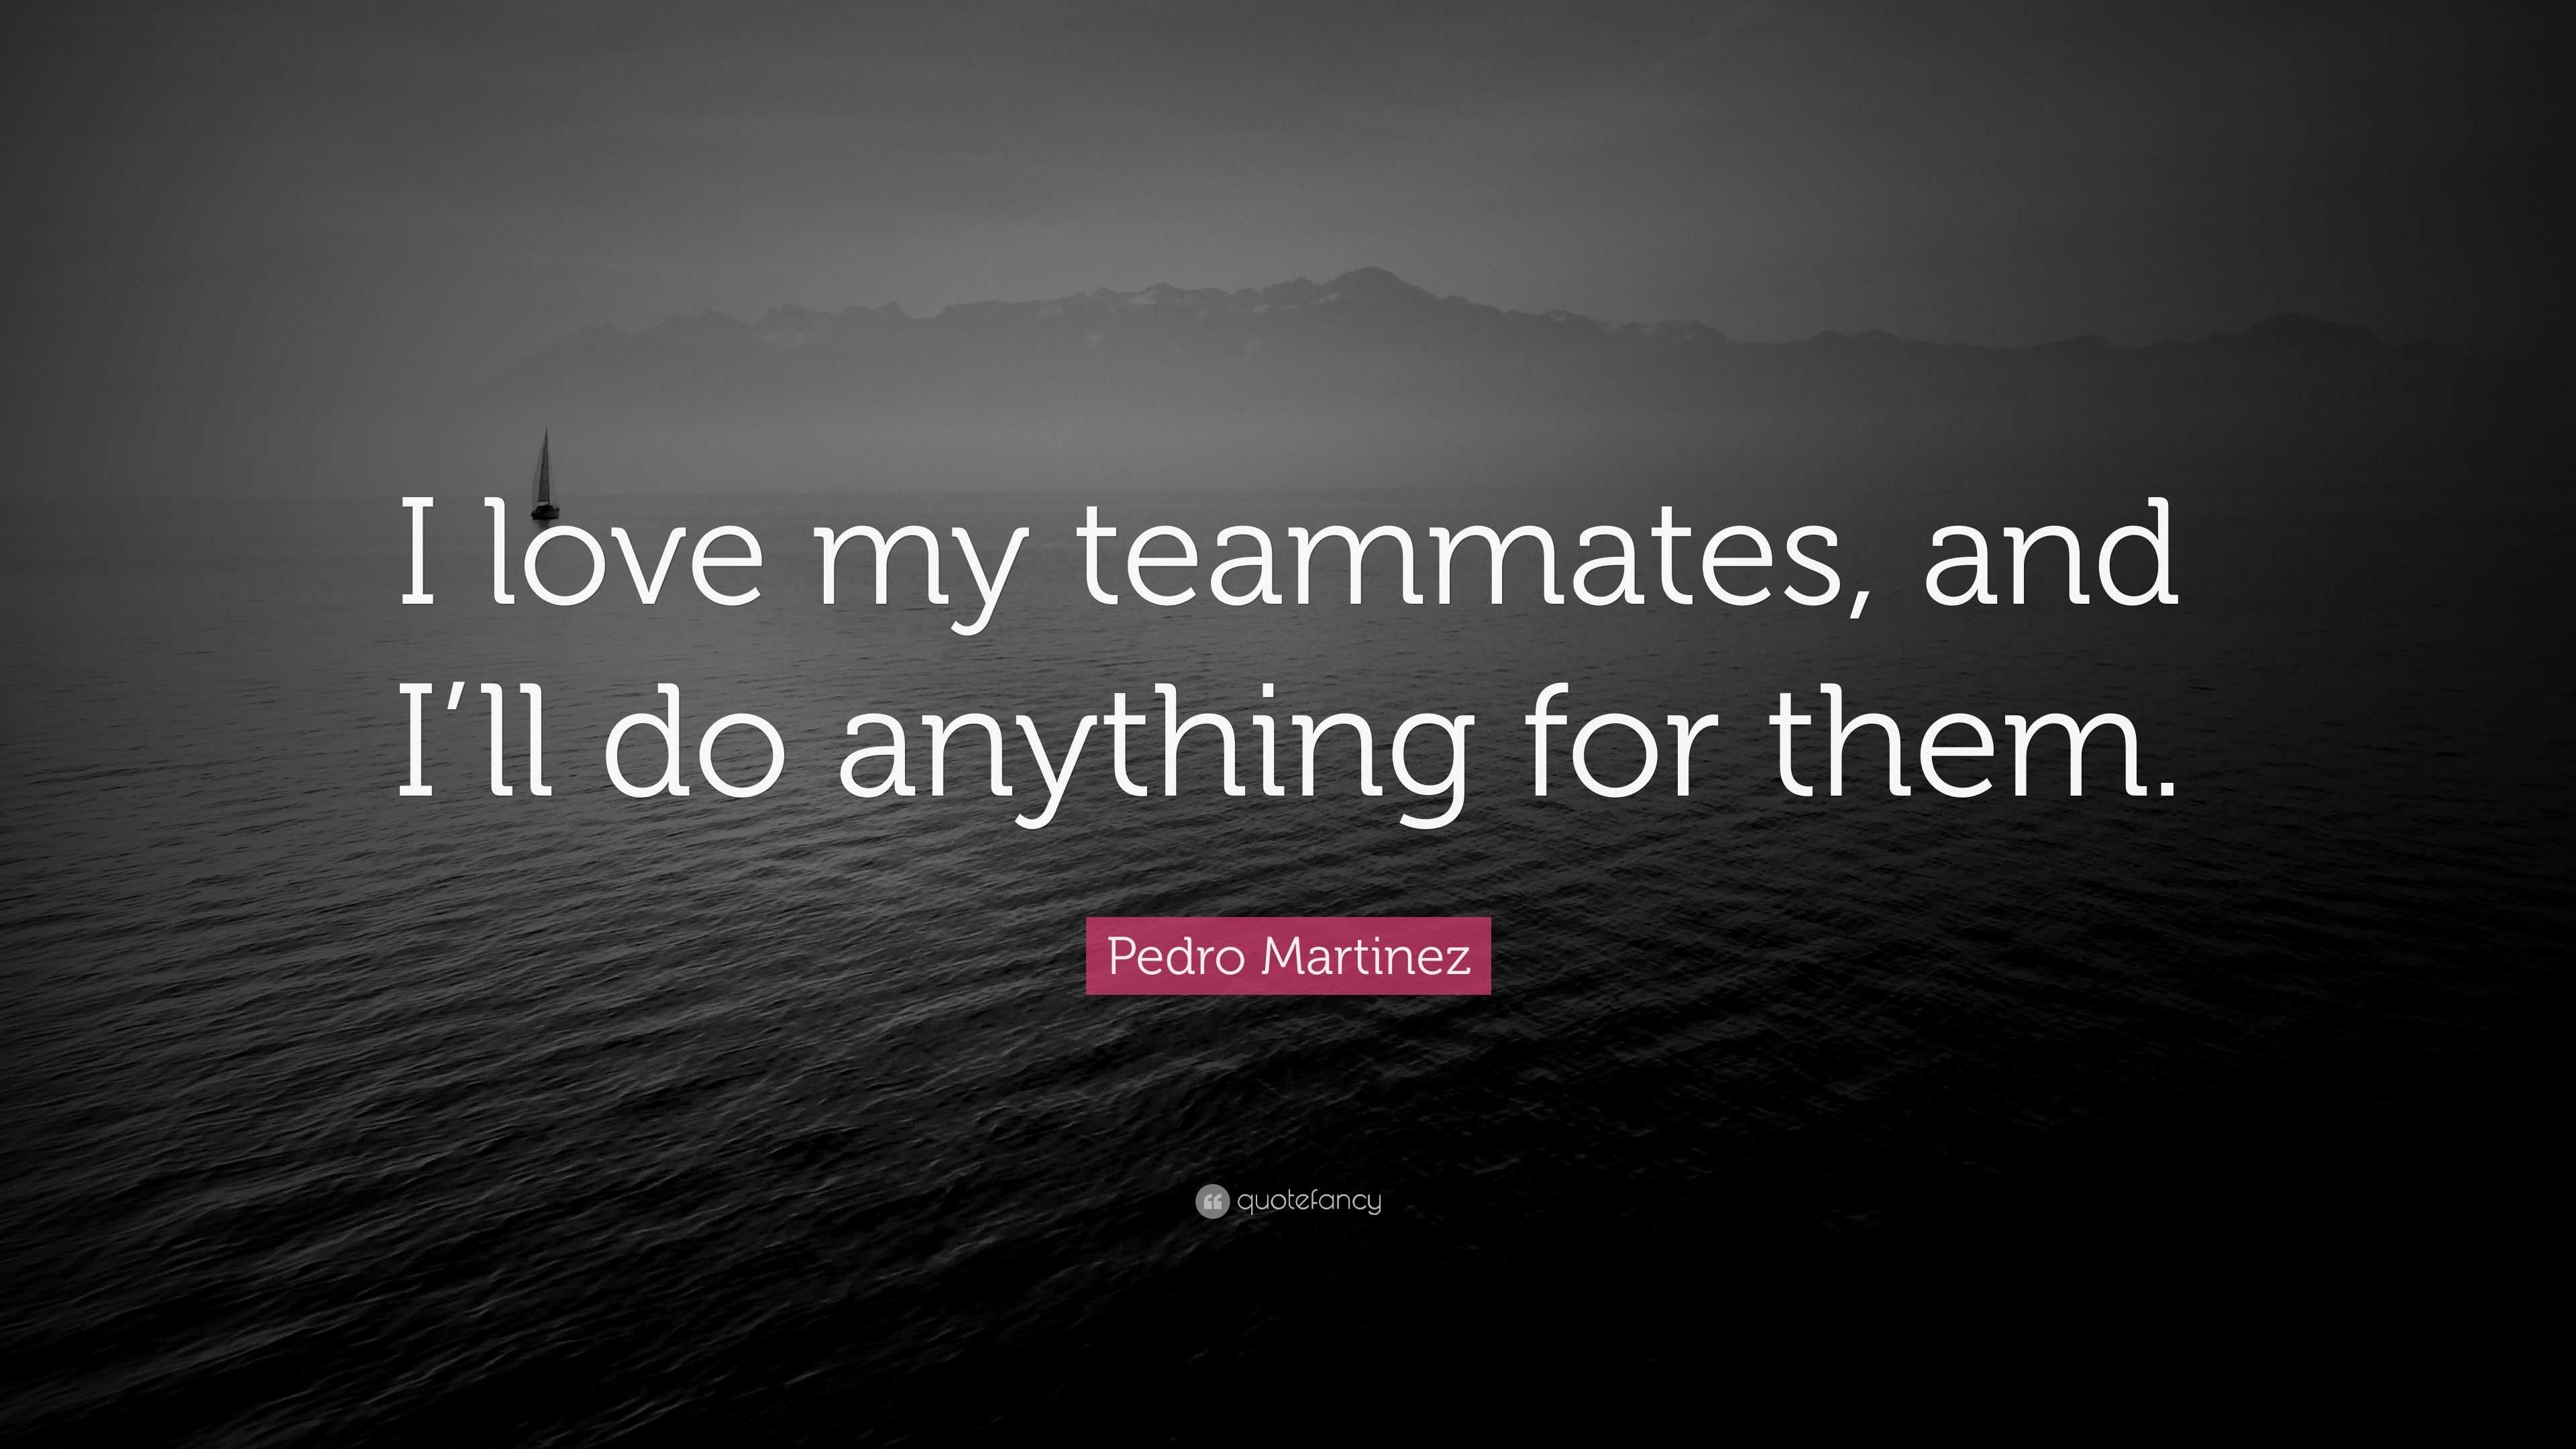 Pedro Martinez Quote: “I just try to do what I have to do and let